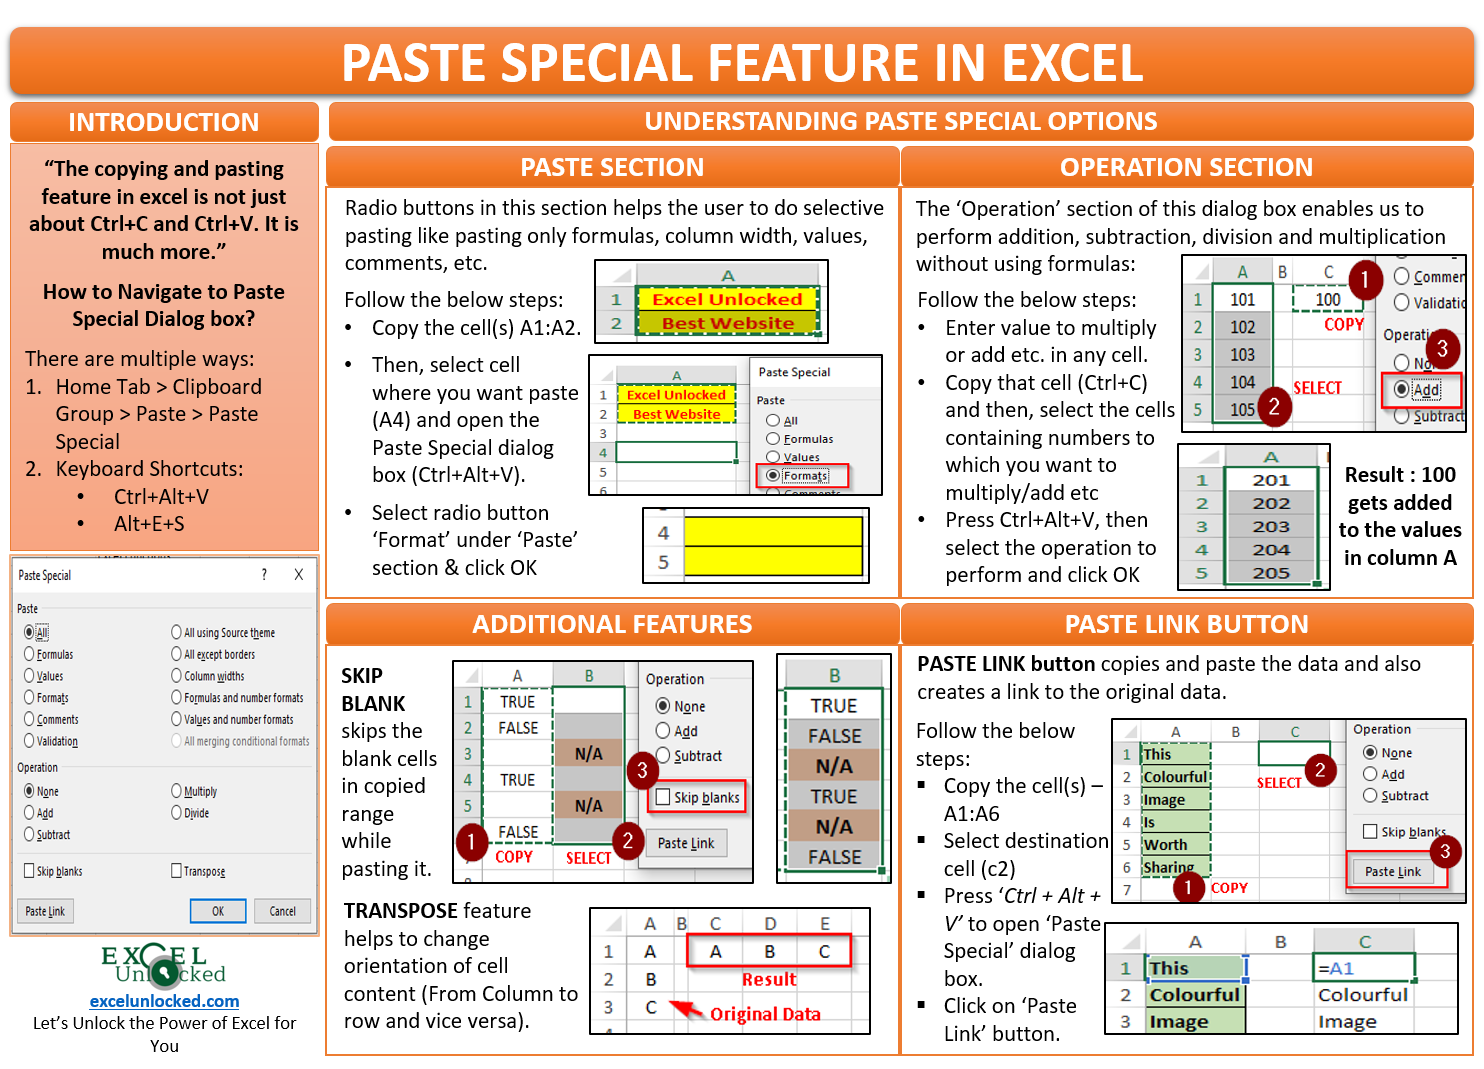 macro to take value in excel and paste it into word doc